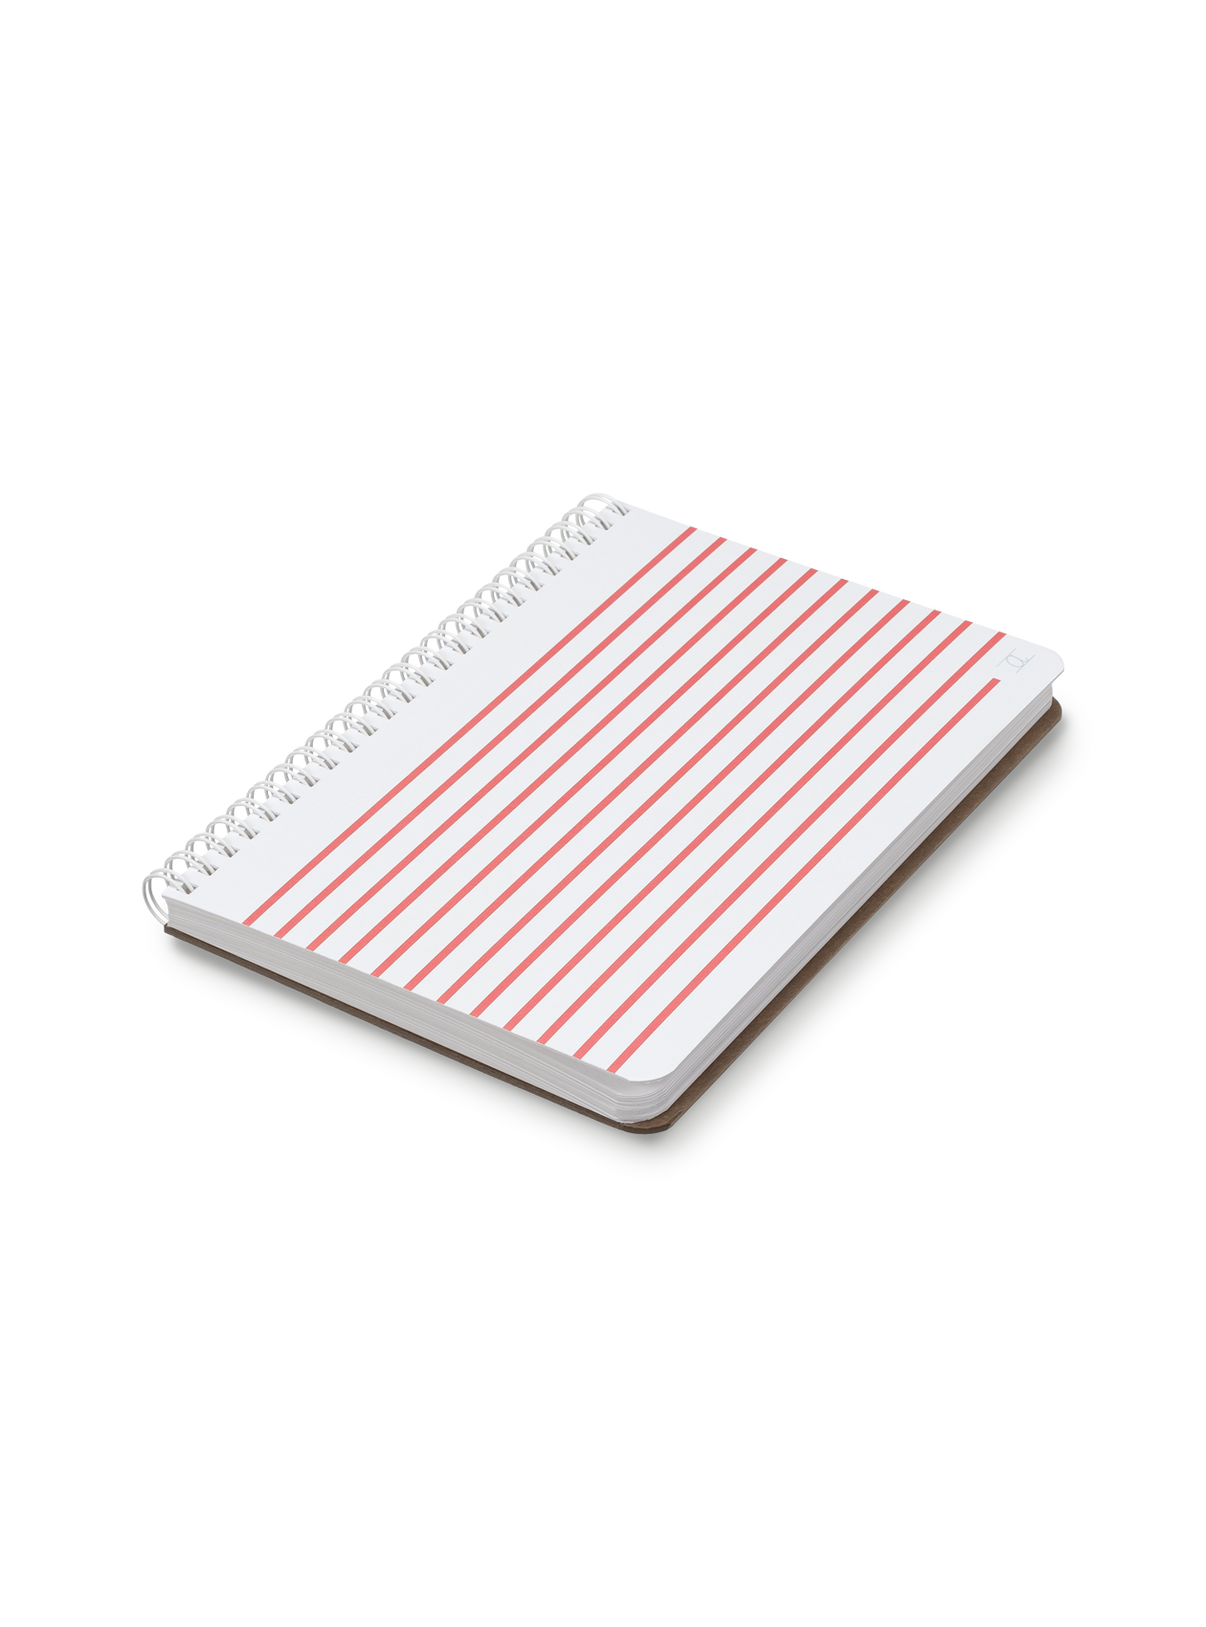 Appointed Kids Spiral Sketchpad in Poppy with white wire-o binding front angled view